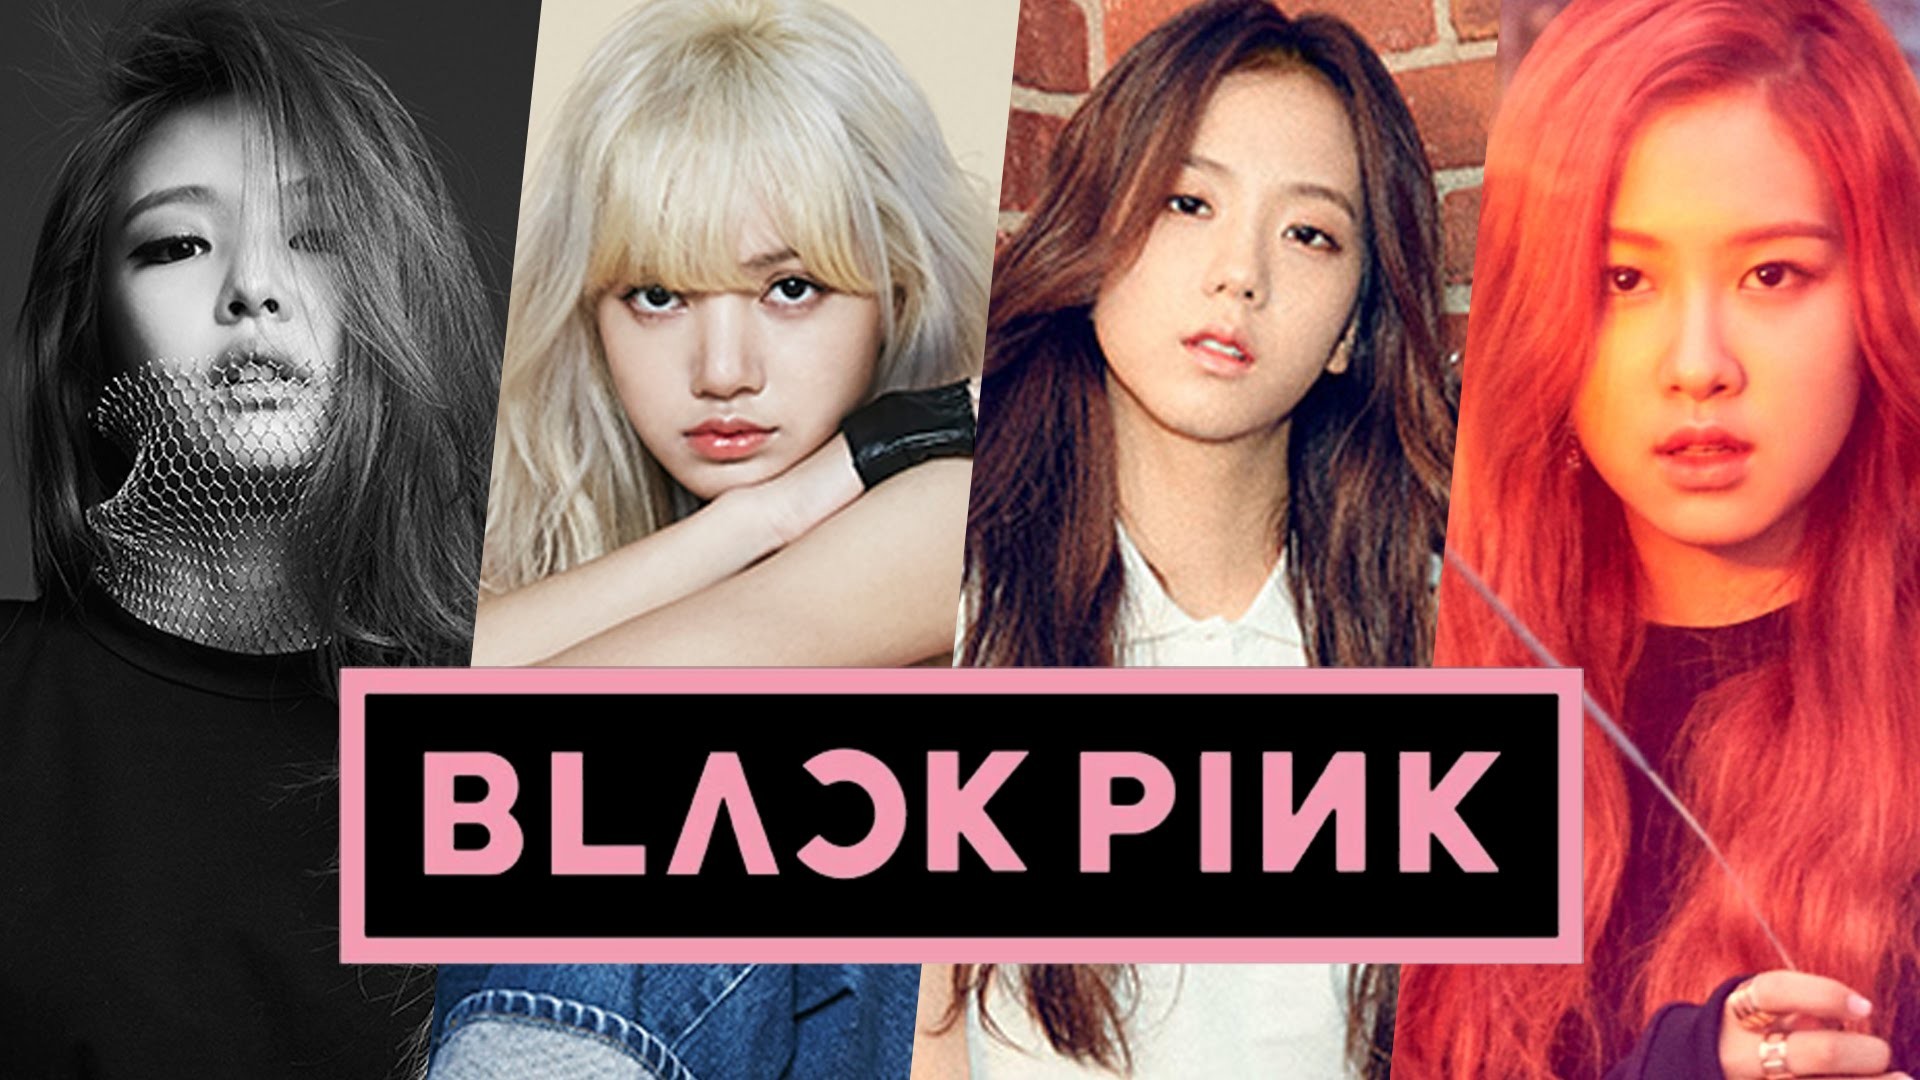 1920x1080 Black rosa images BLACKPINK HD wallpaper and background photos